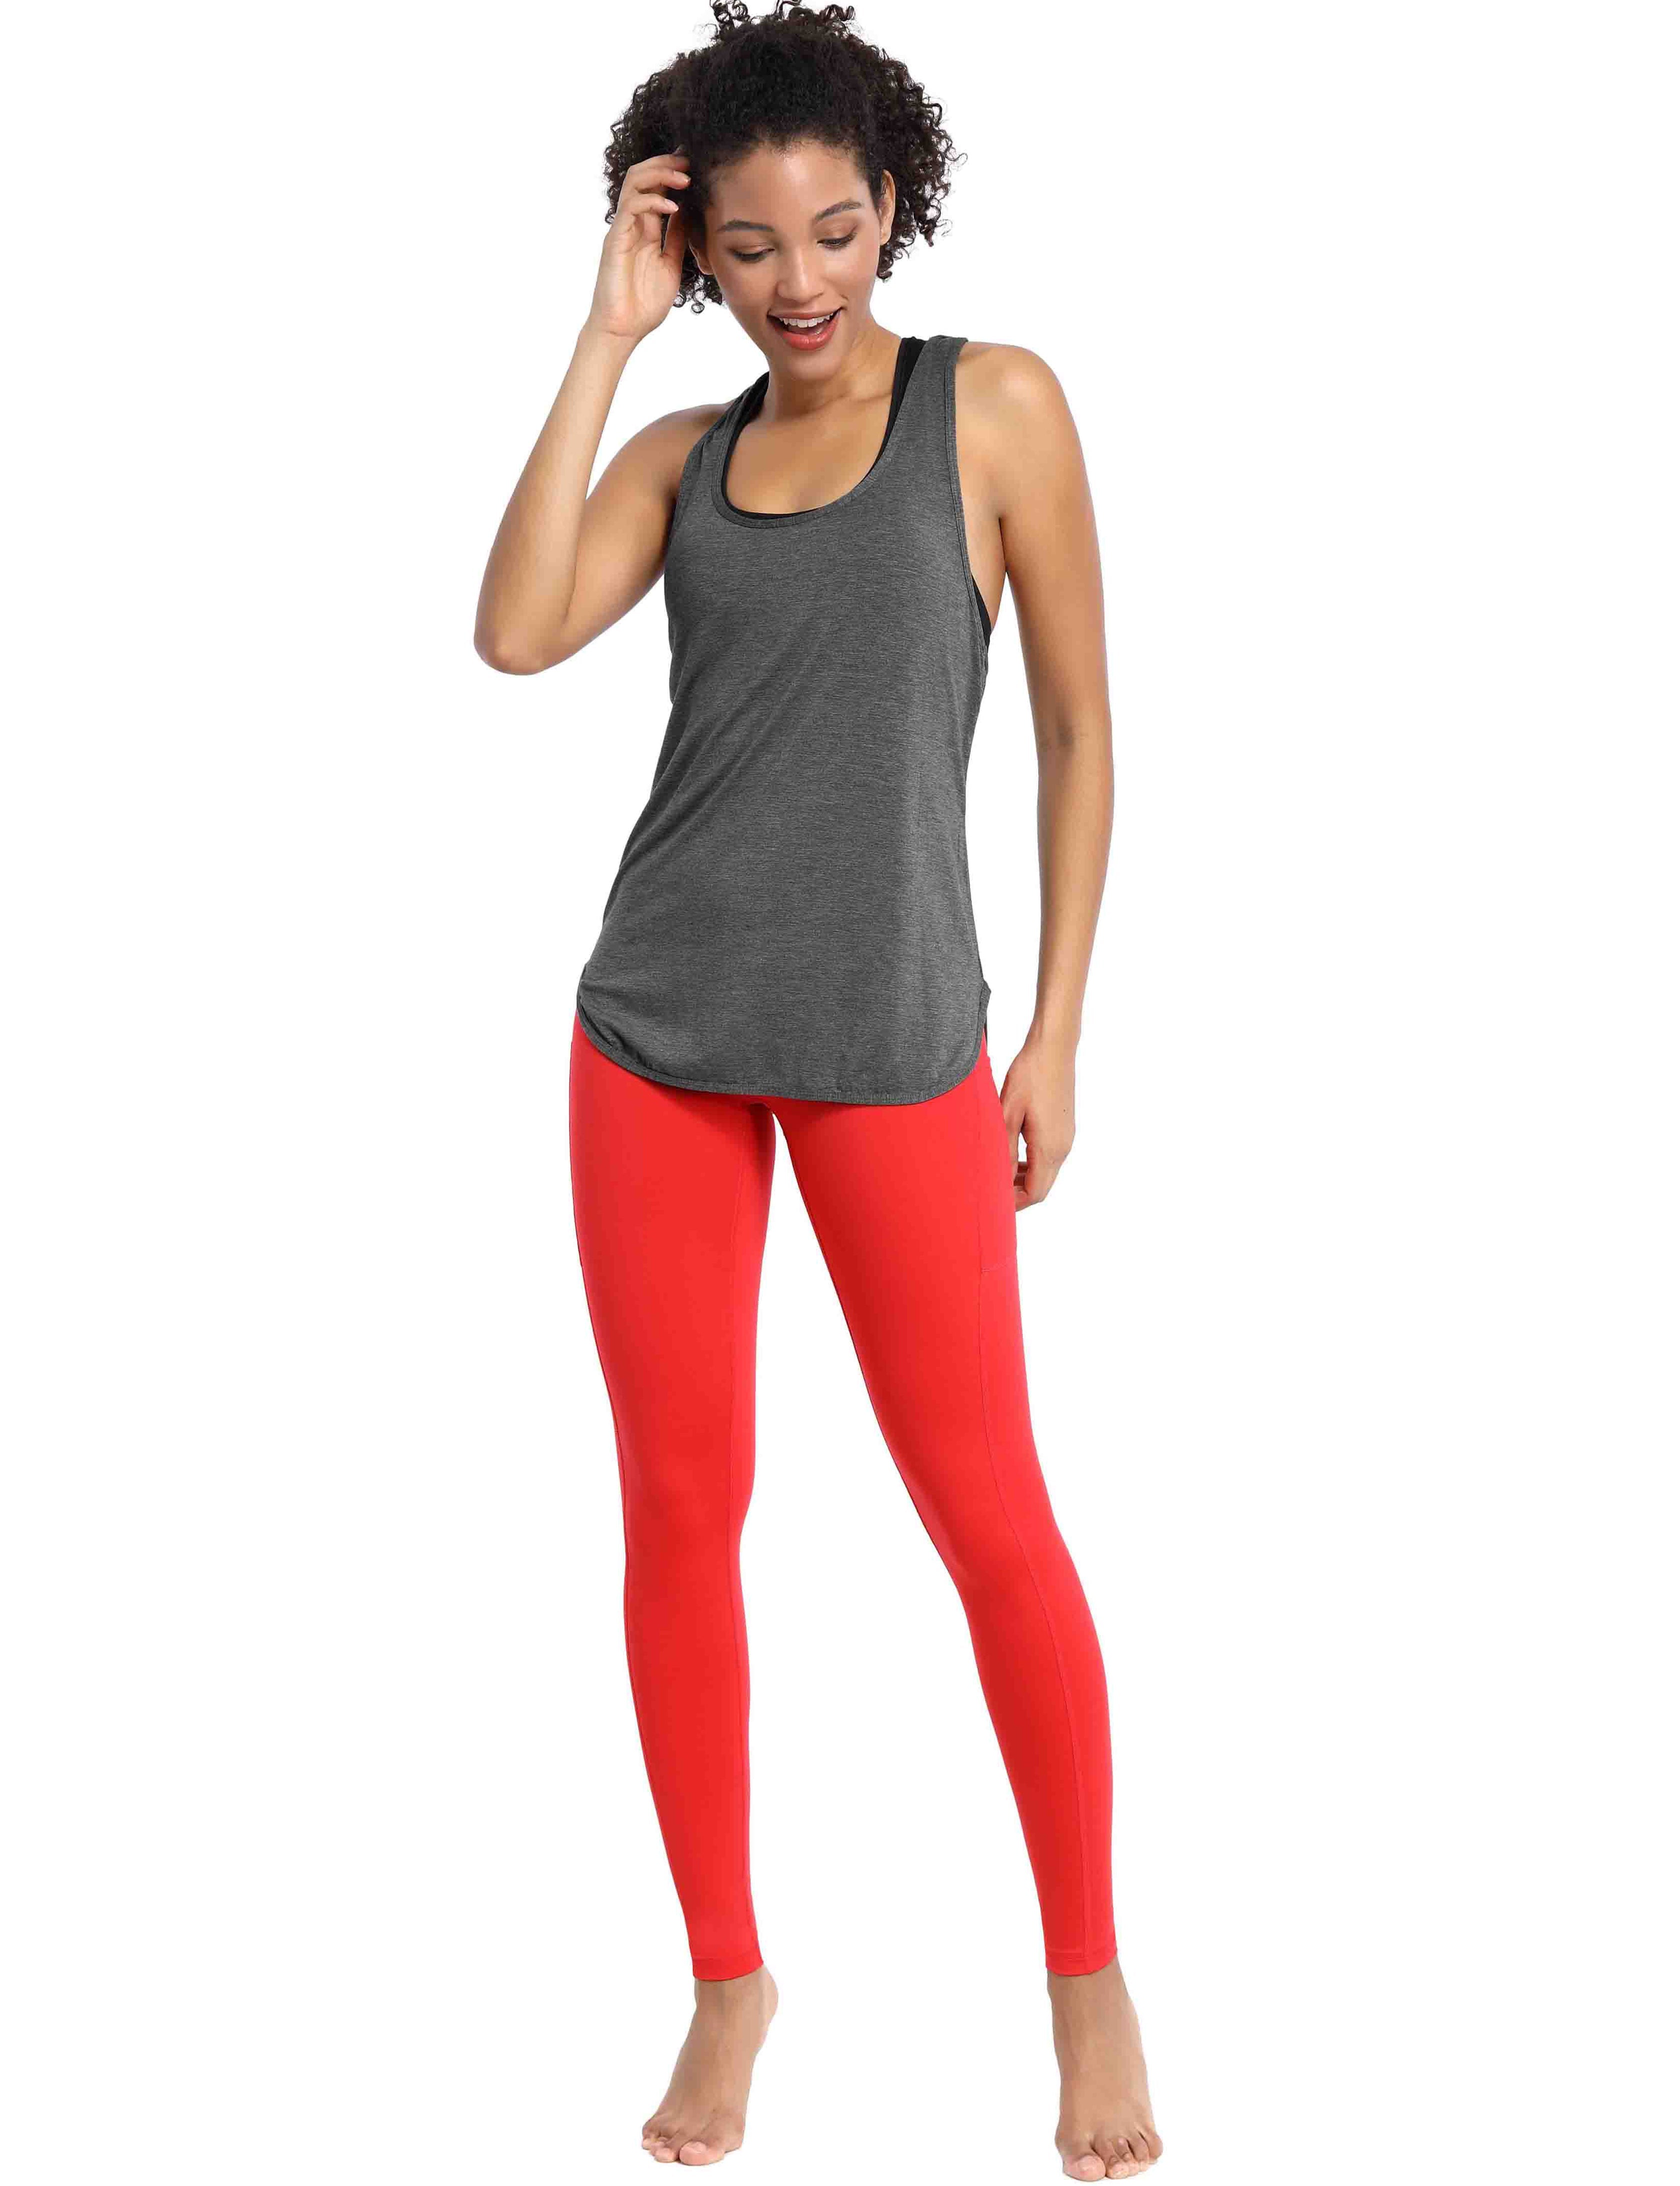 Loose Fit Racerback Tank Top heathercharcoal Designed for On the Move Loose fit 93%Modal/7%Spandex Four-way stretch Naturally breathable Super-Soft, Modal Fabric